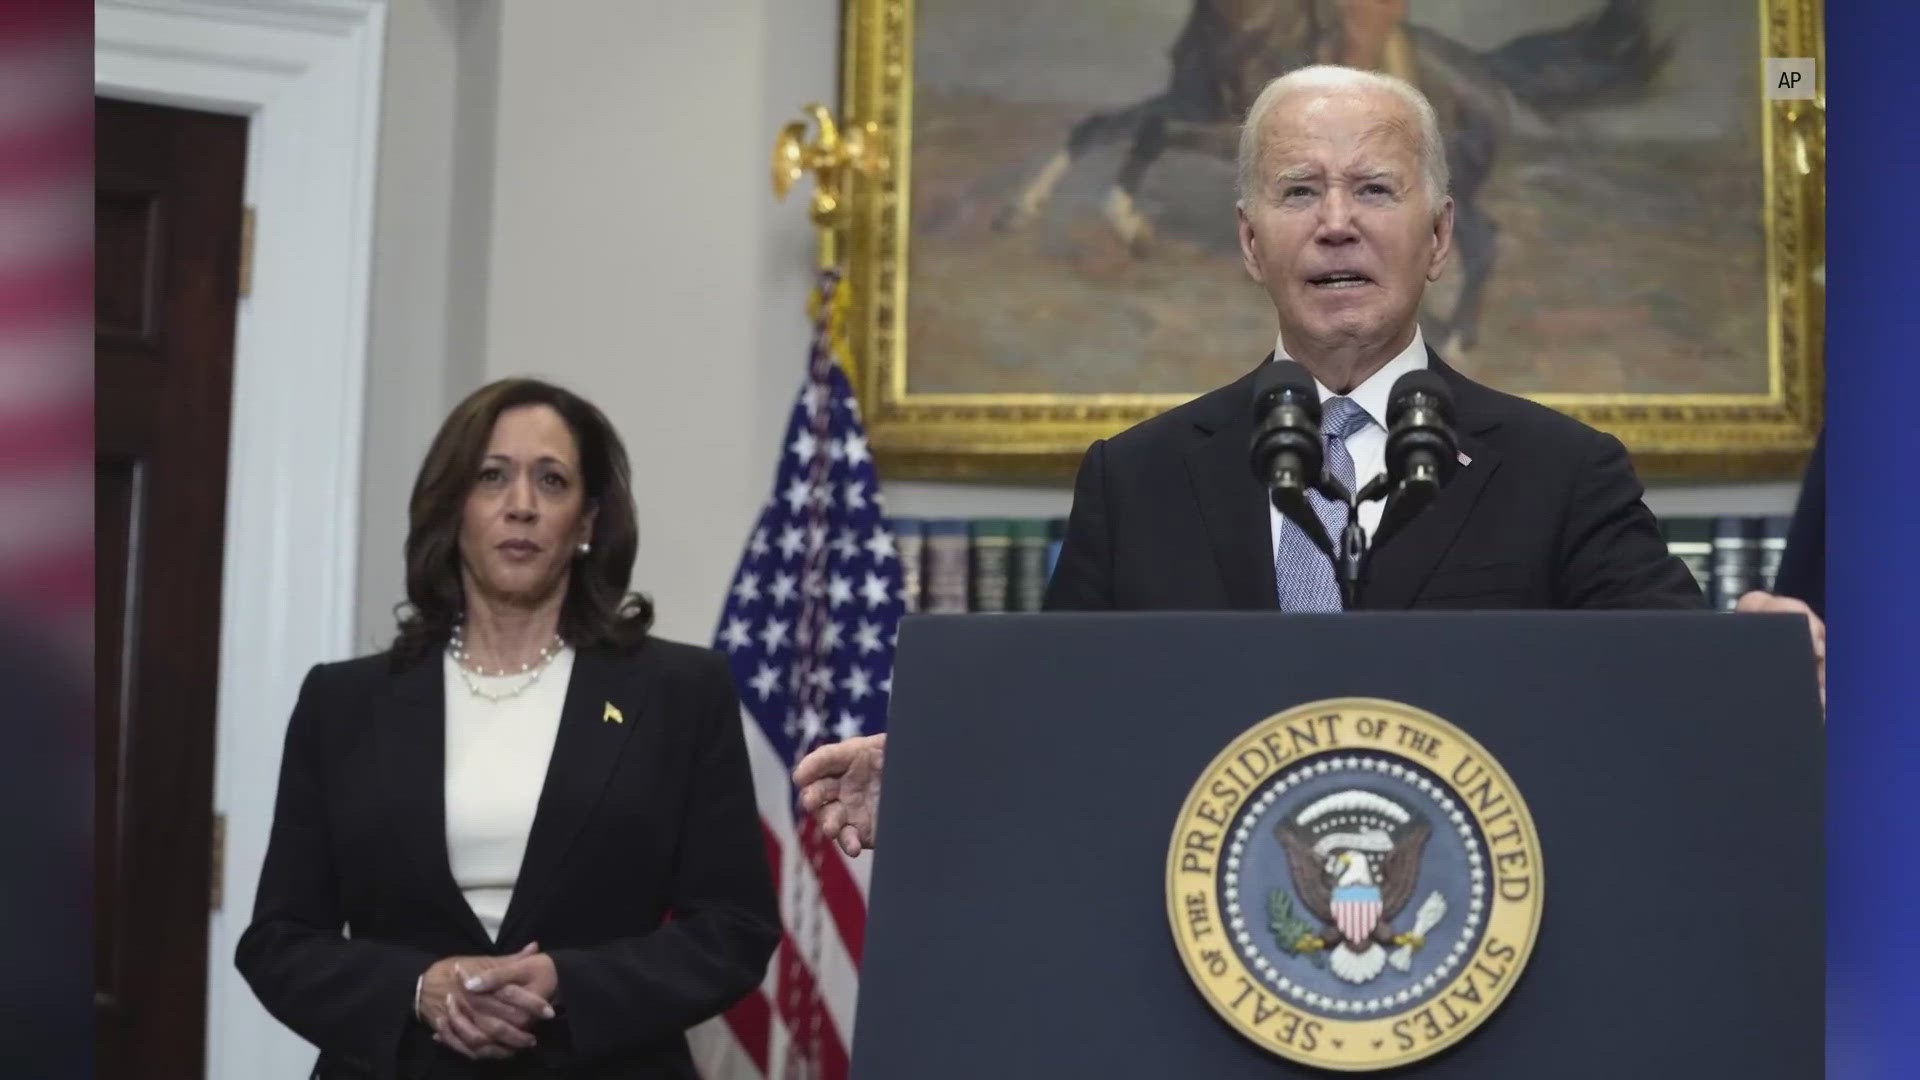 President Joe Biden announced he is no longer running for reelection and many California leaders issued statements in response.